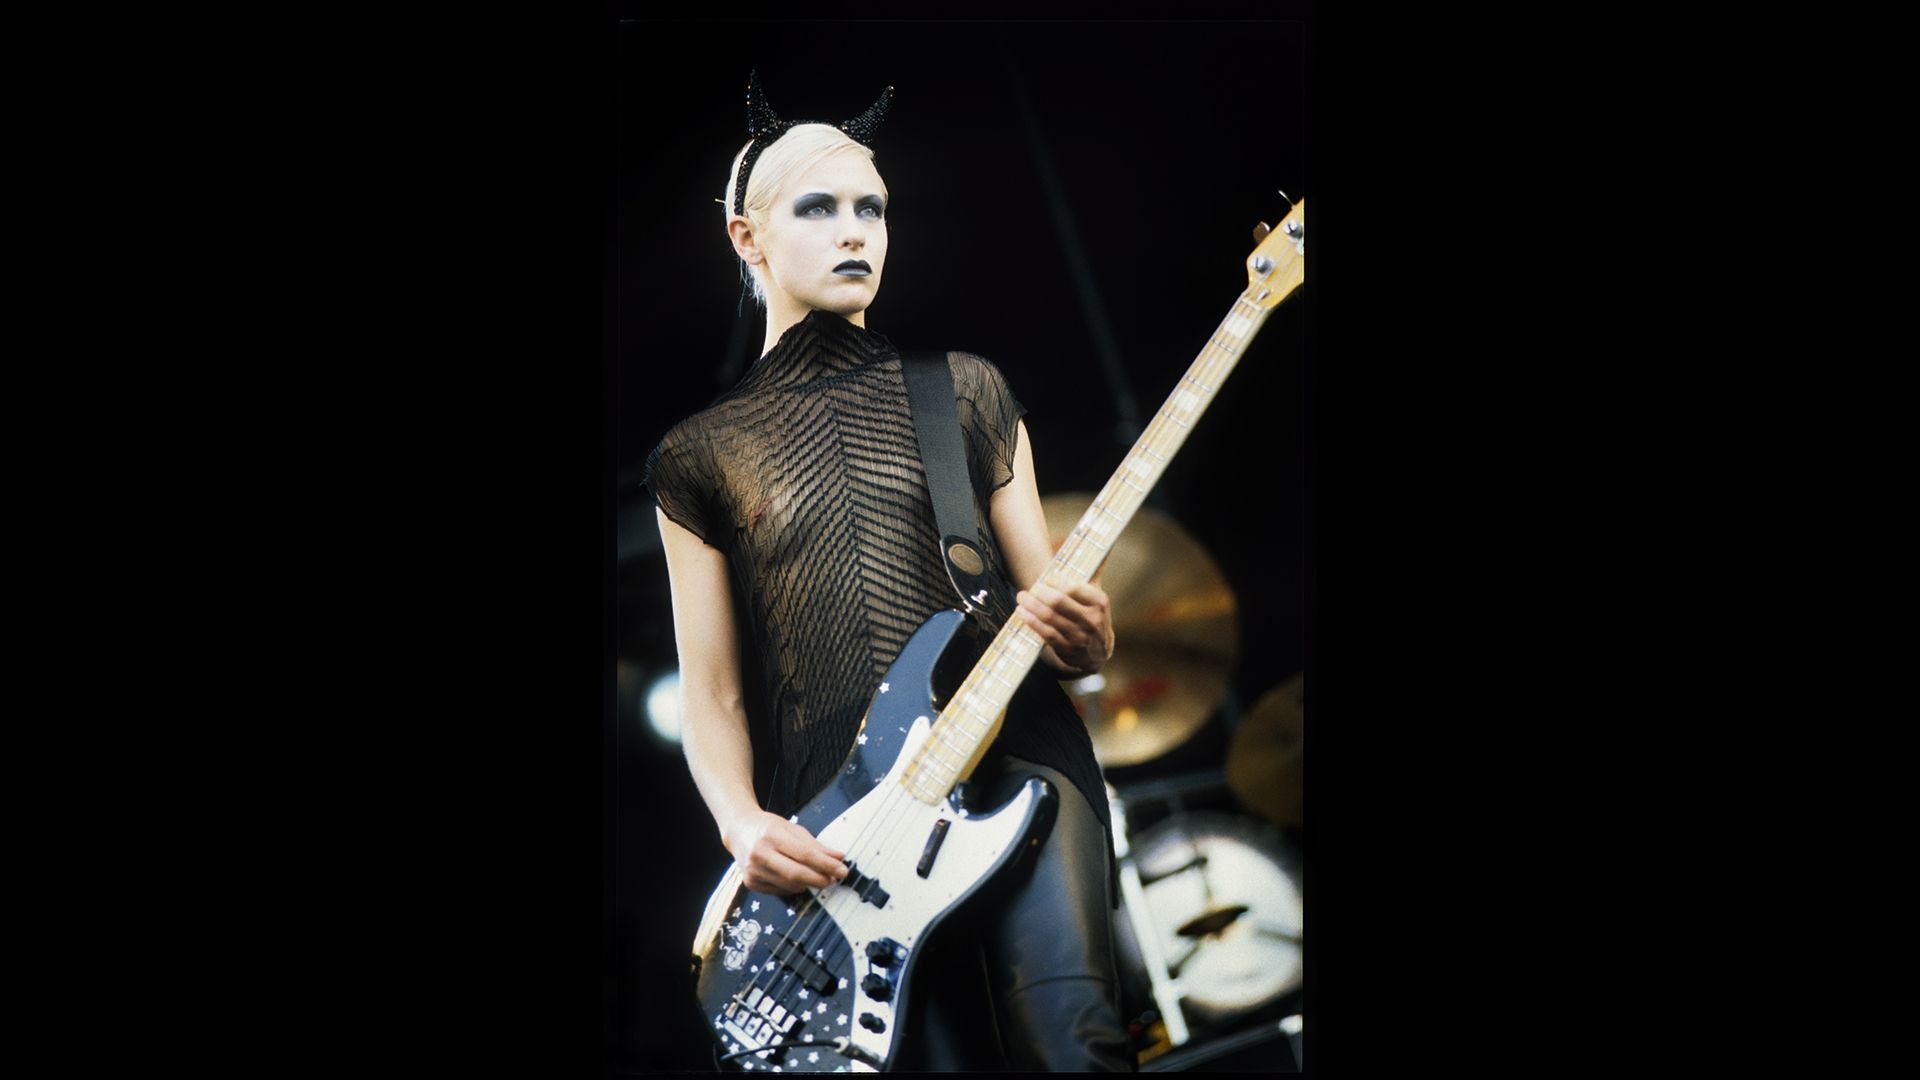 D’Arcy Redsky is the cult figure of the Smashing Pumpkins